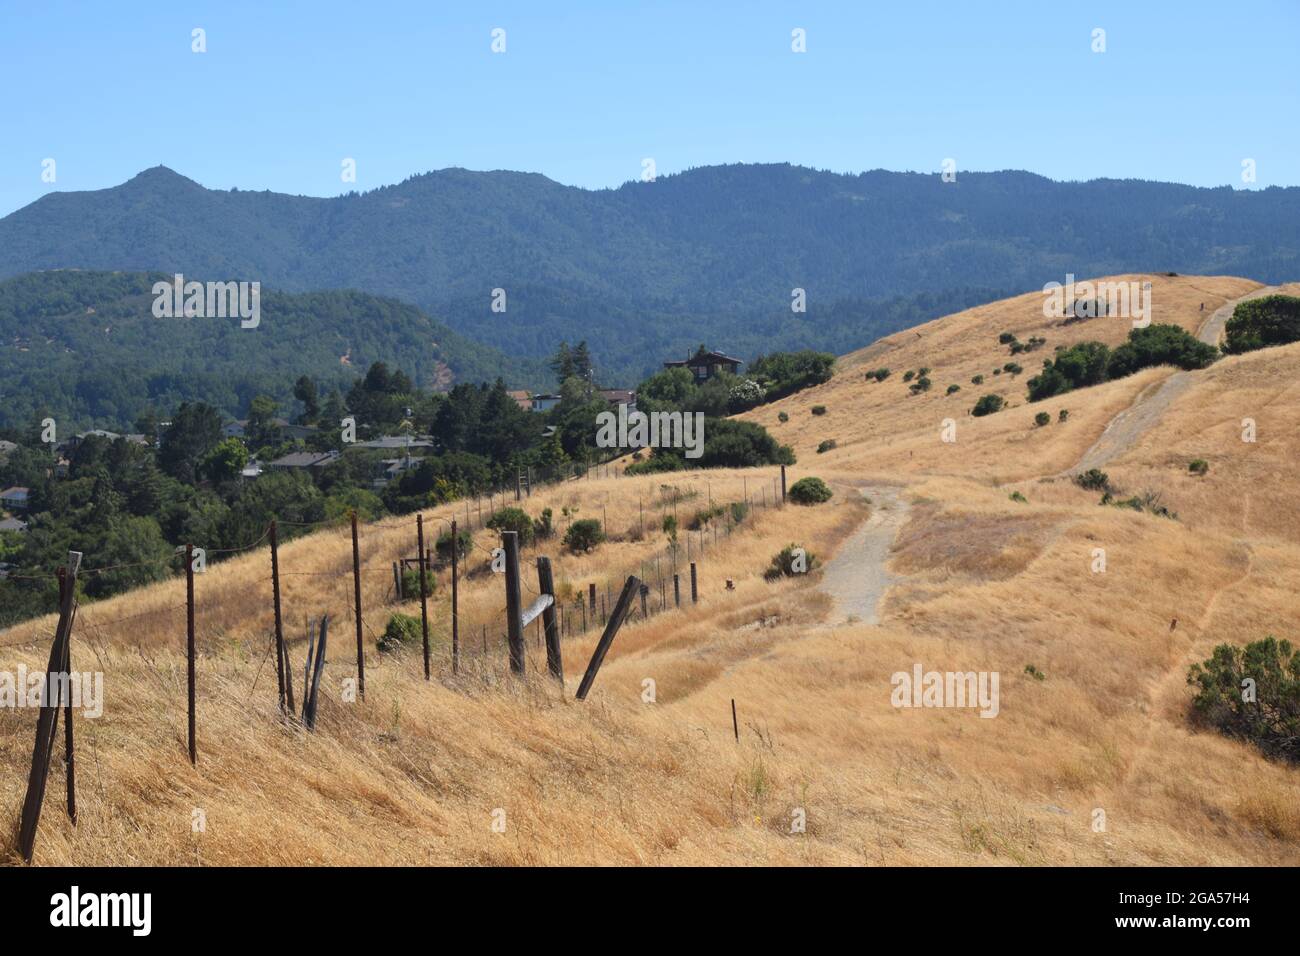 A view of the scenery in Marin County, California Stock Photo